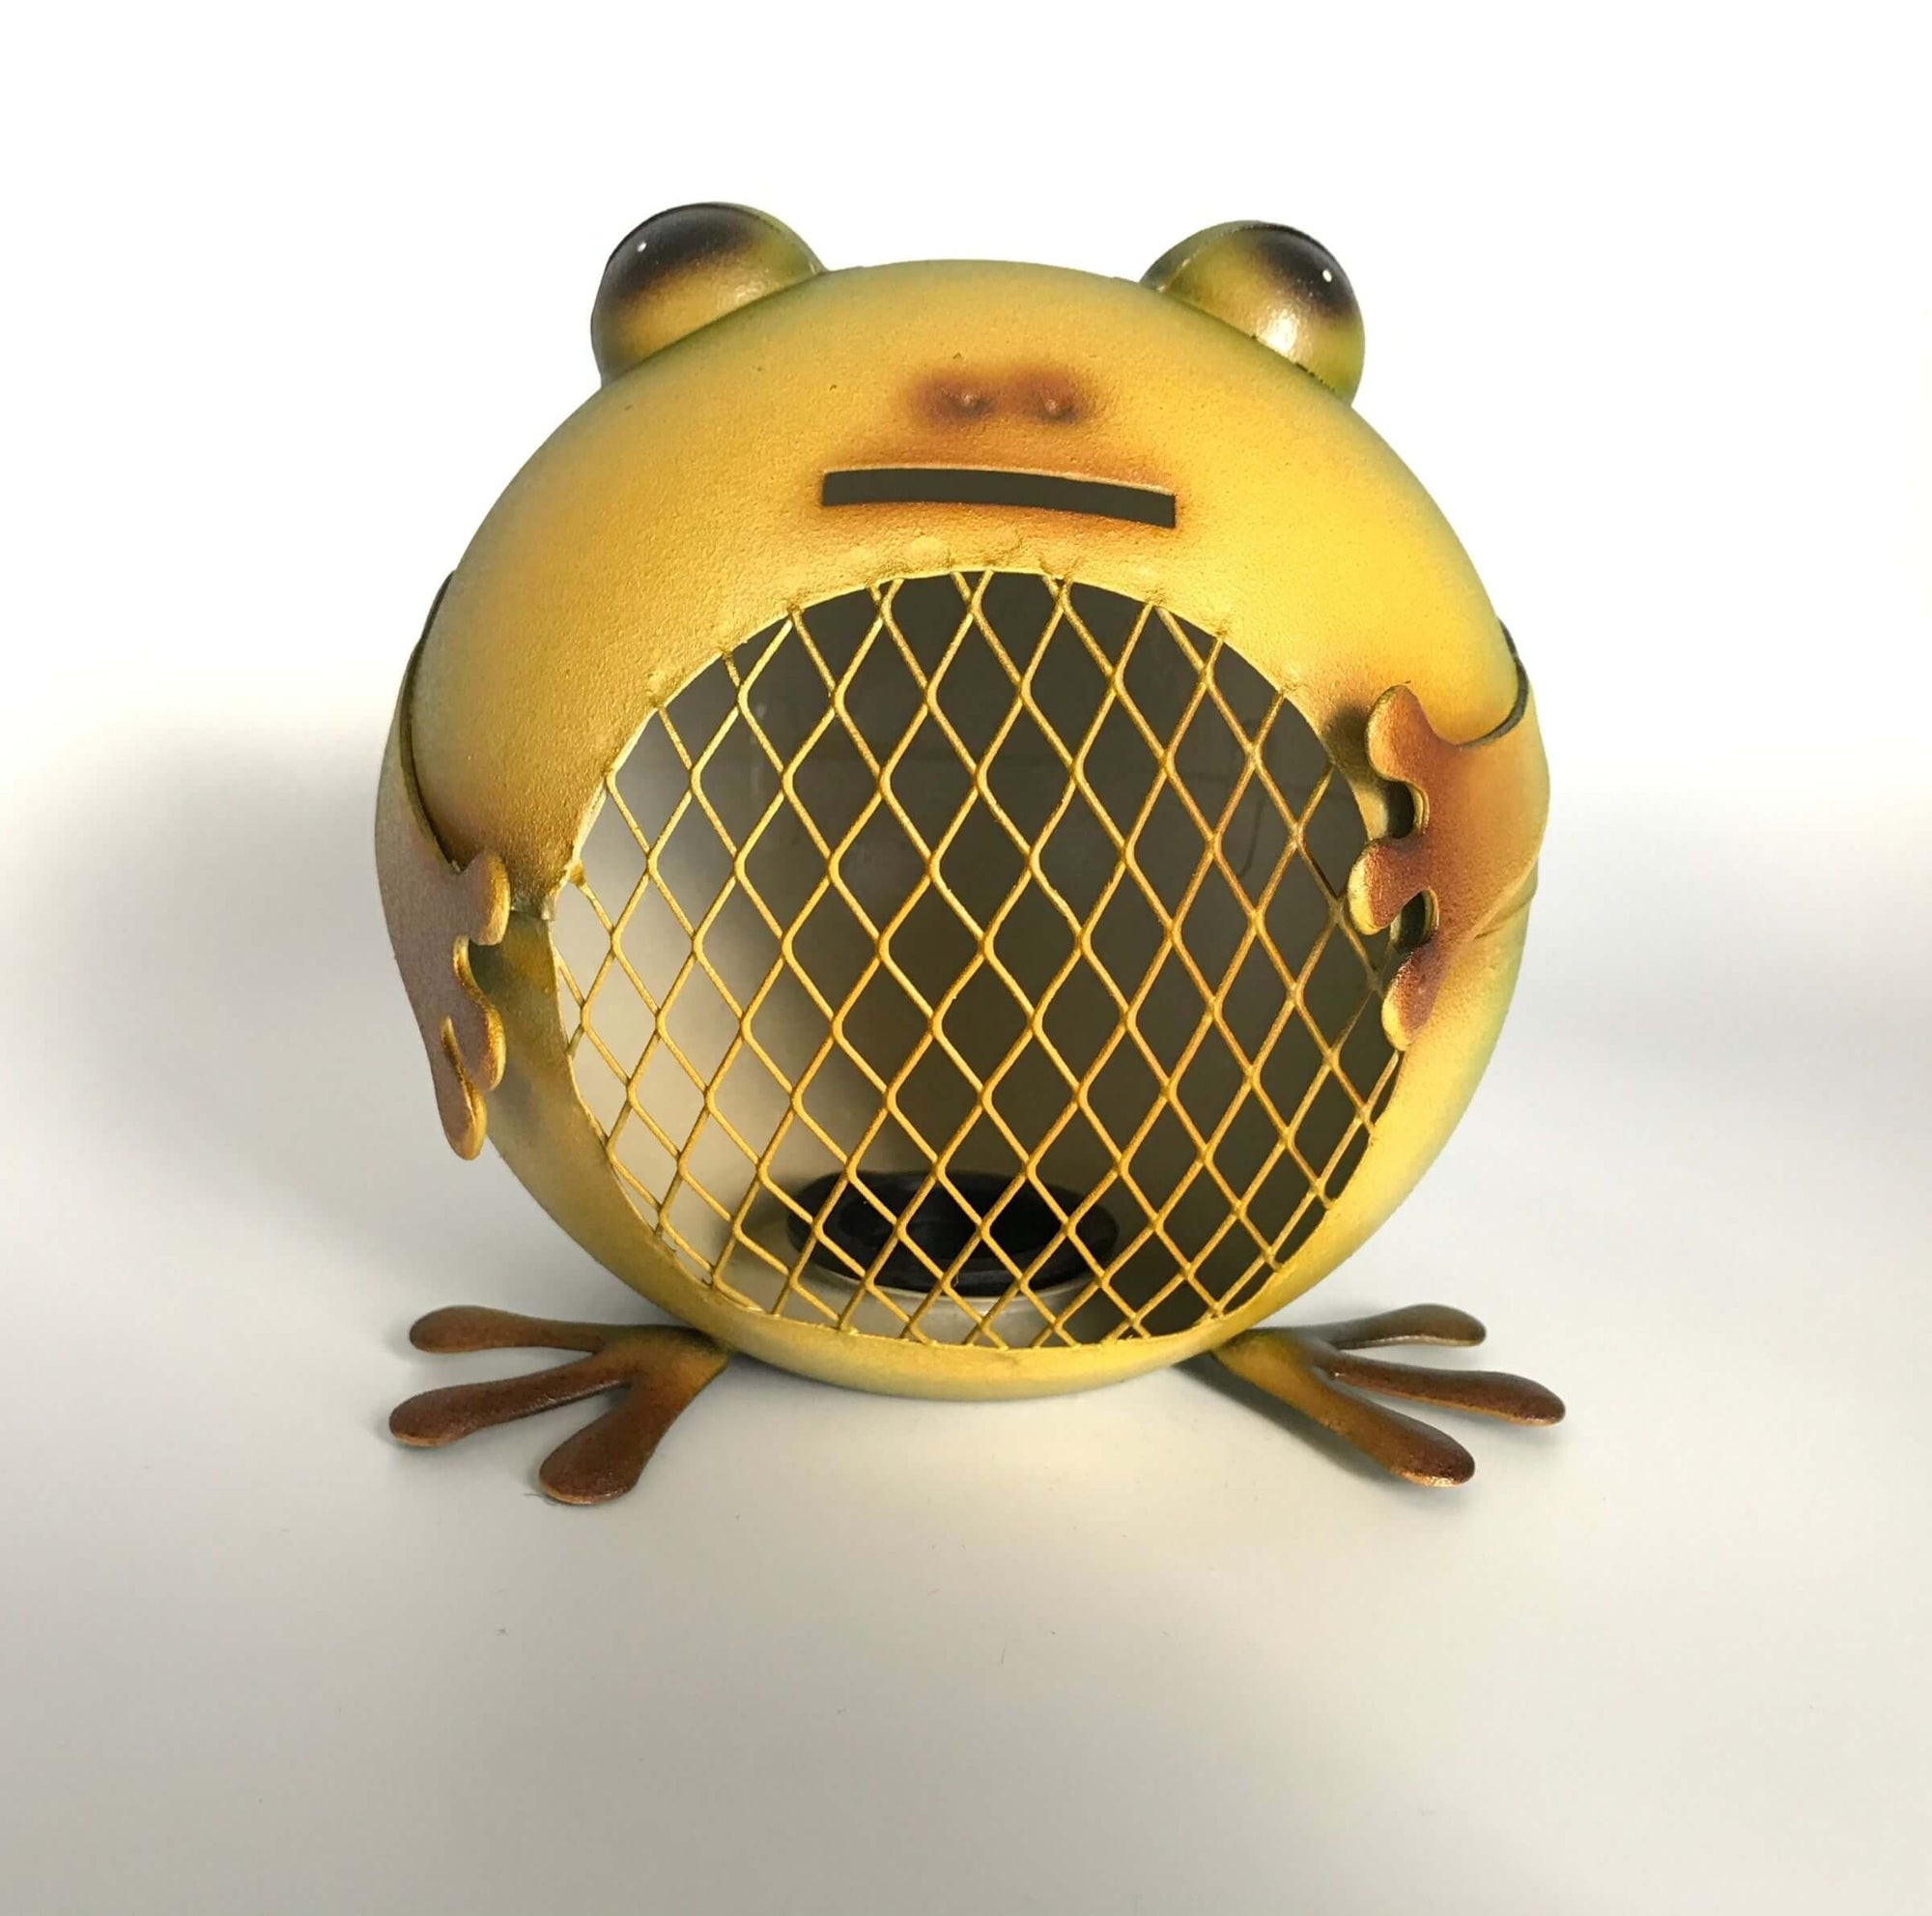 Our delightful little frog piggy bank is just too cute to pass up!